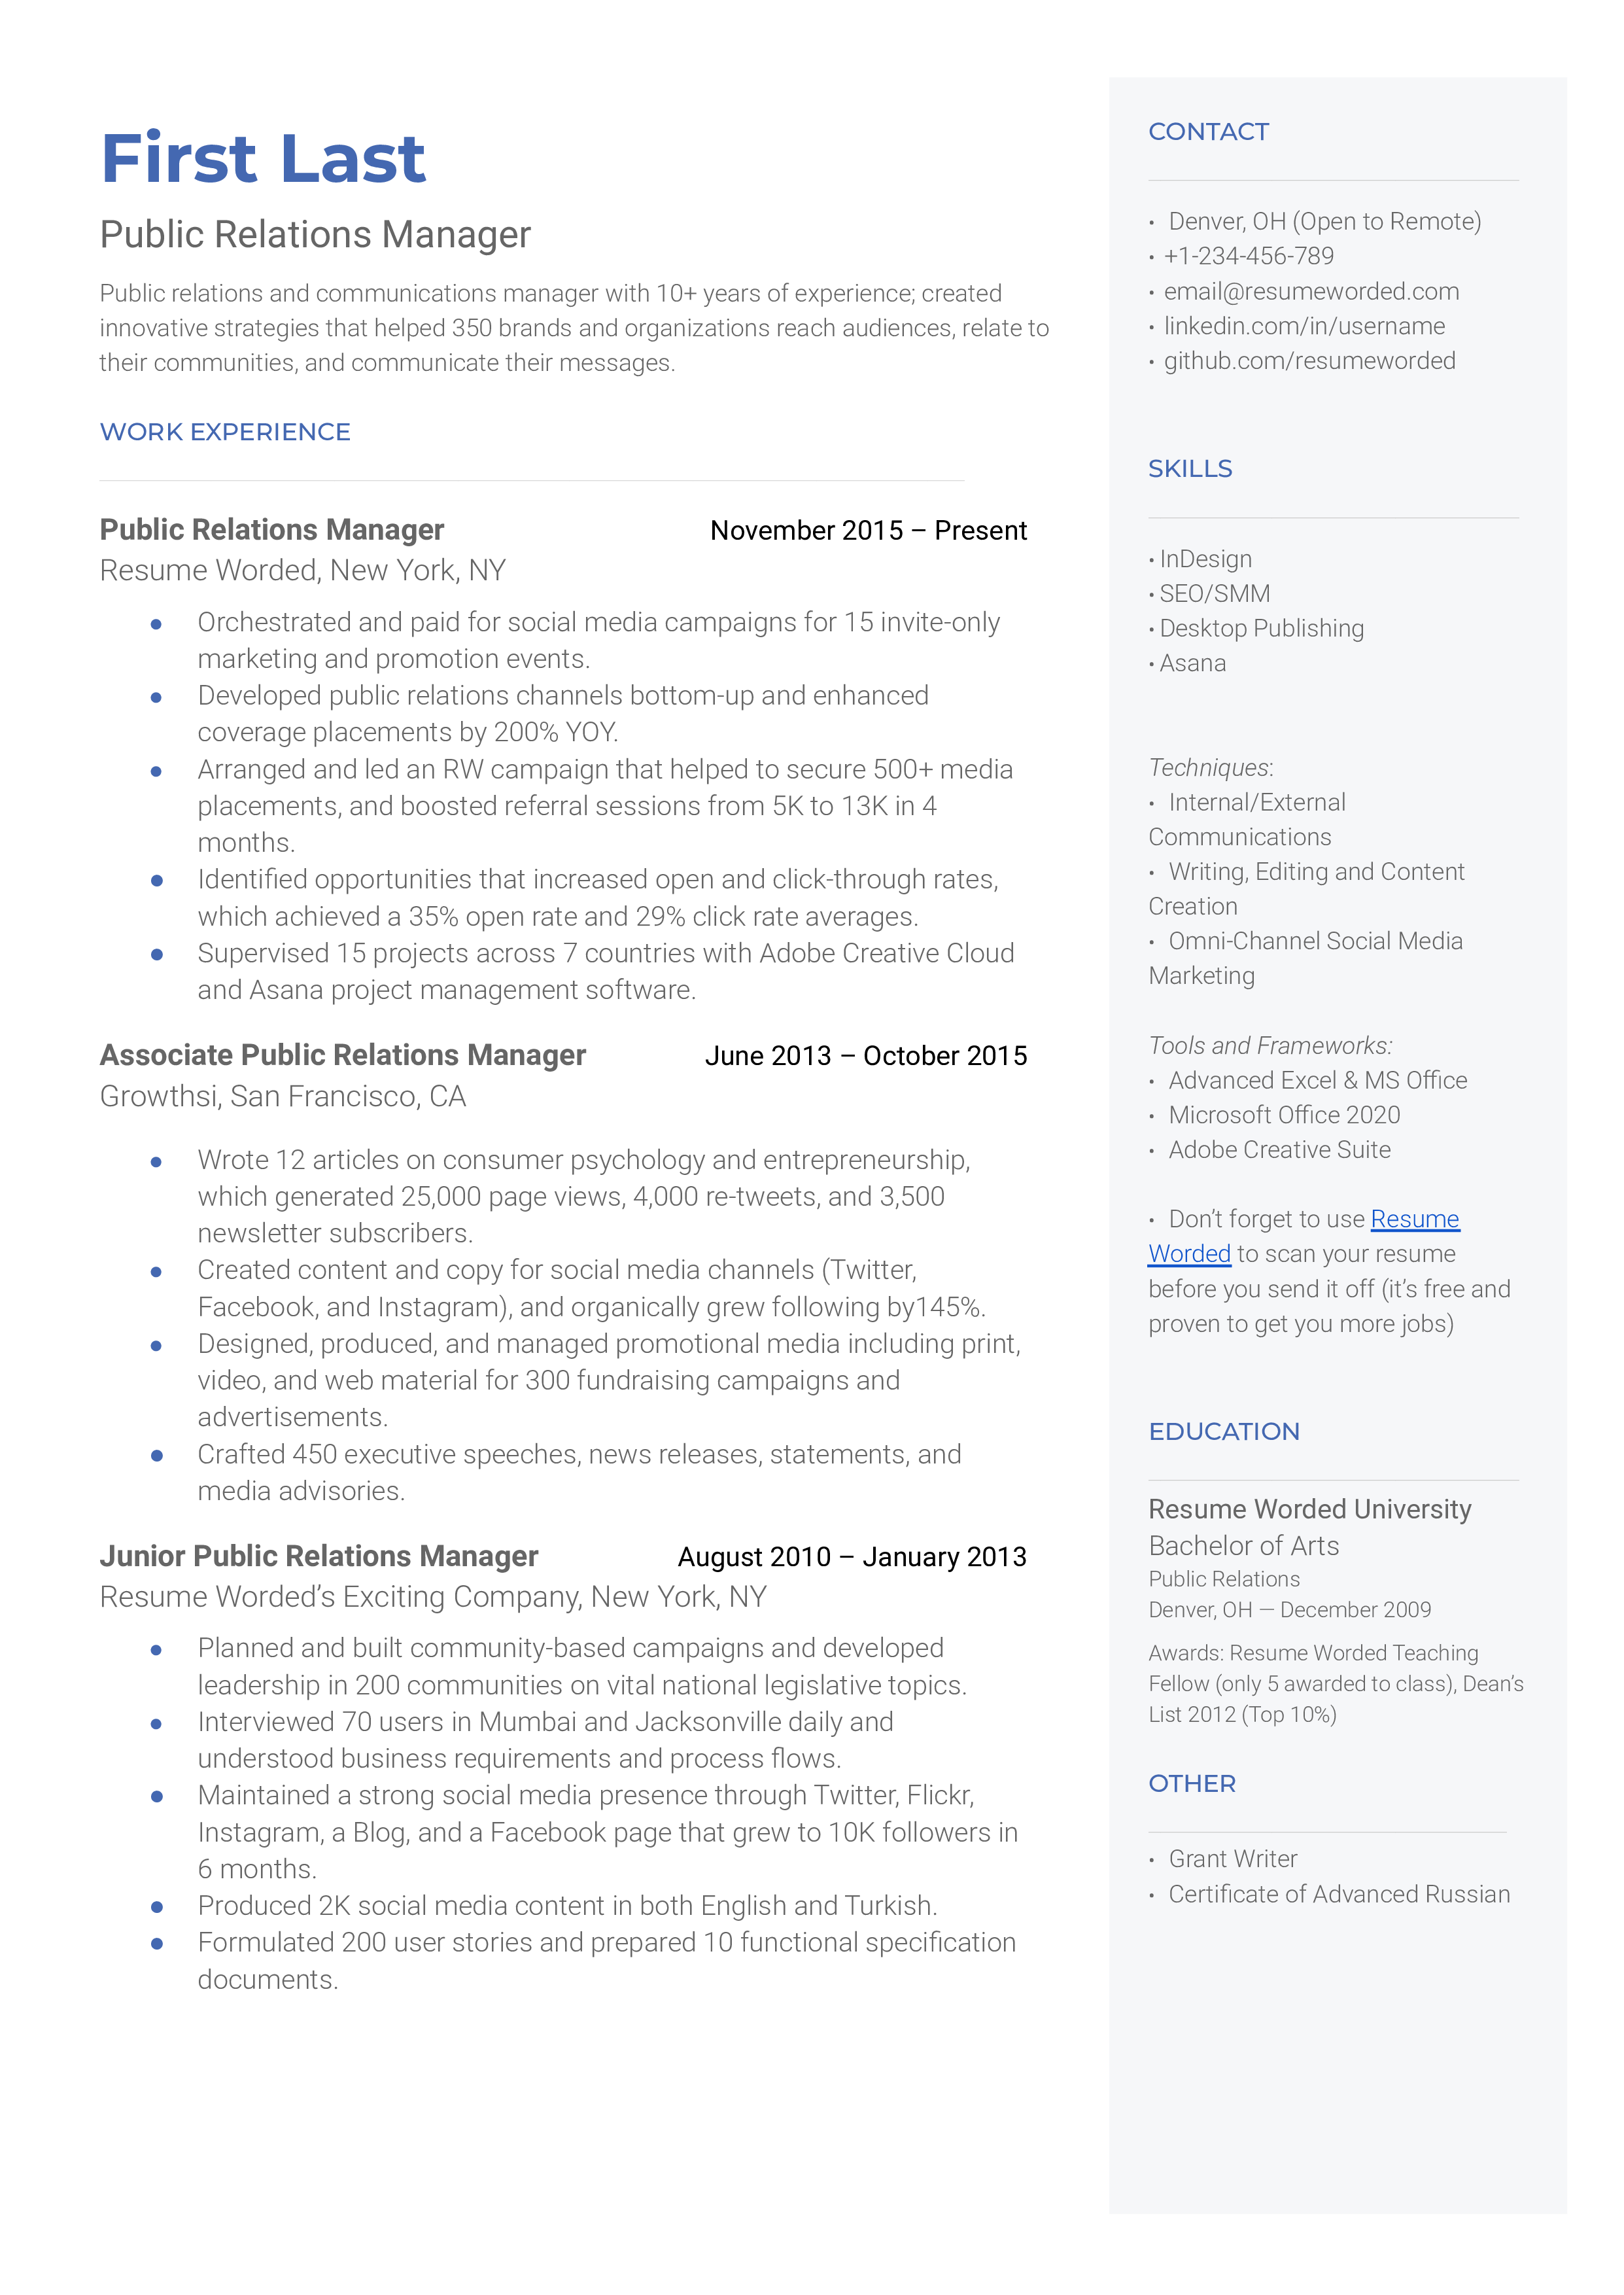 Public Relations Manager Resume Sample